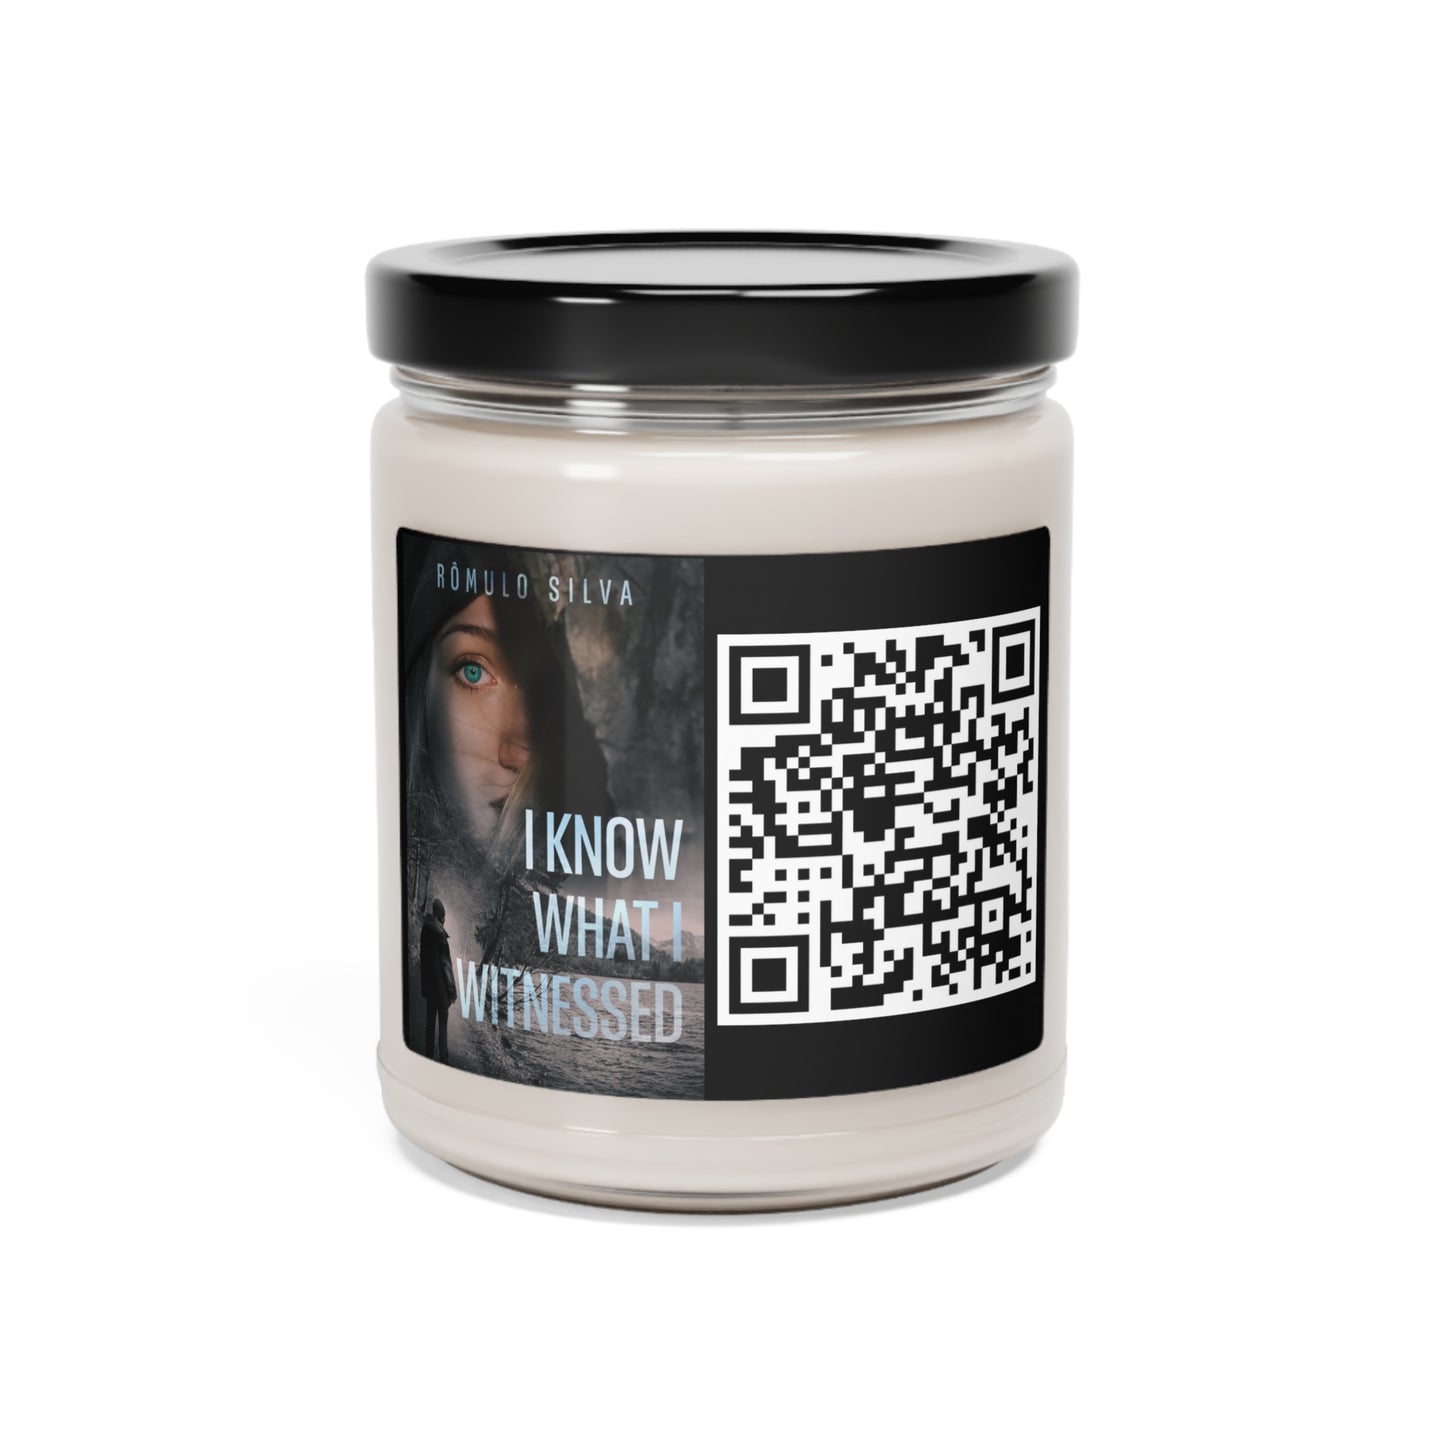 I Know What I Witnessed - Scented Soy Candle